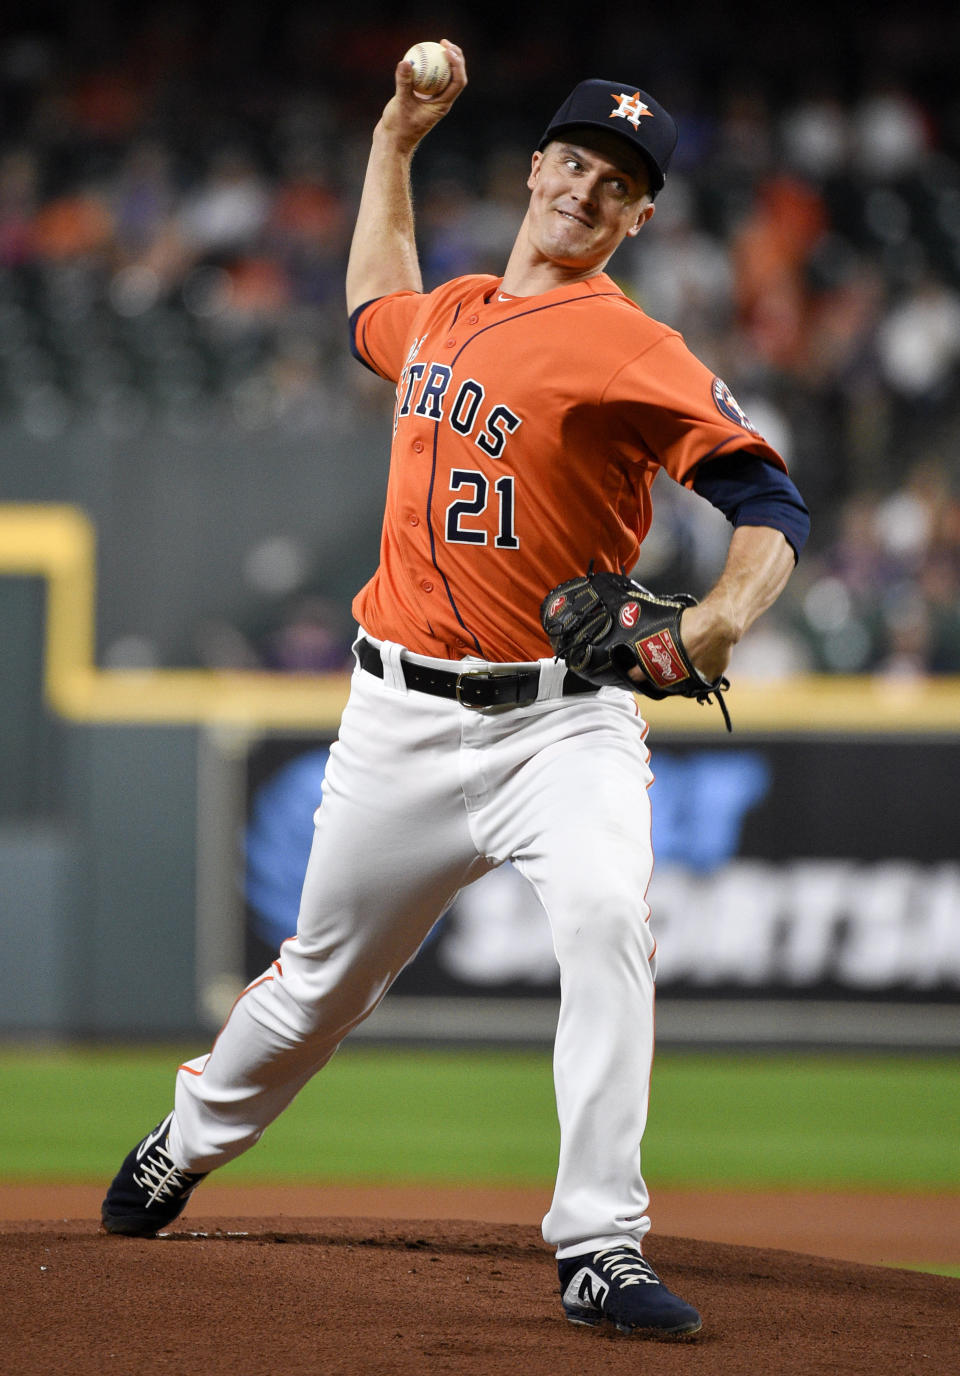 Houston Astros starting pitcher Zack Greinke delivers during the first inning of a baseball game against the Los Angeles Angels, Friday, Sept. 20, 2019, in Houston. (AP Photo/Eric Christian Smith)